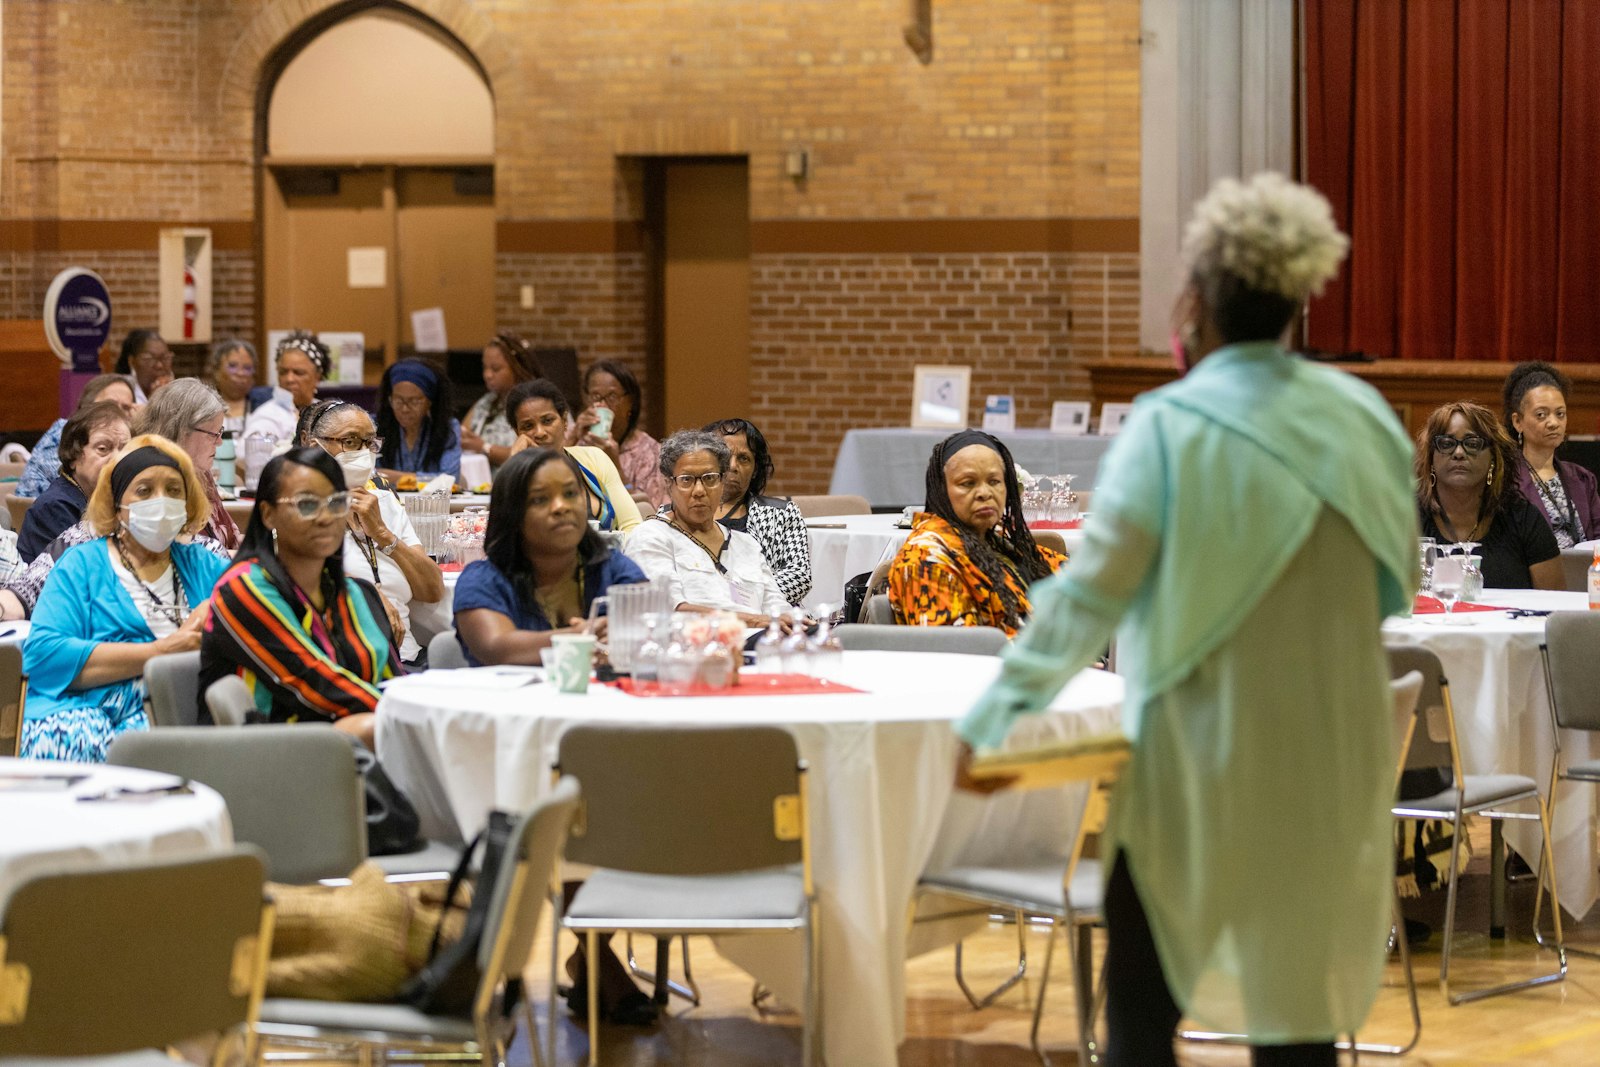 Fr. John McKenzie of Christ the King Parish in Detroit celebrated Mass with the women during the conference, encouraging mothers to talk to their sons and young people in their parish about serving the Church as priests and in leadership roles.